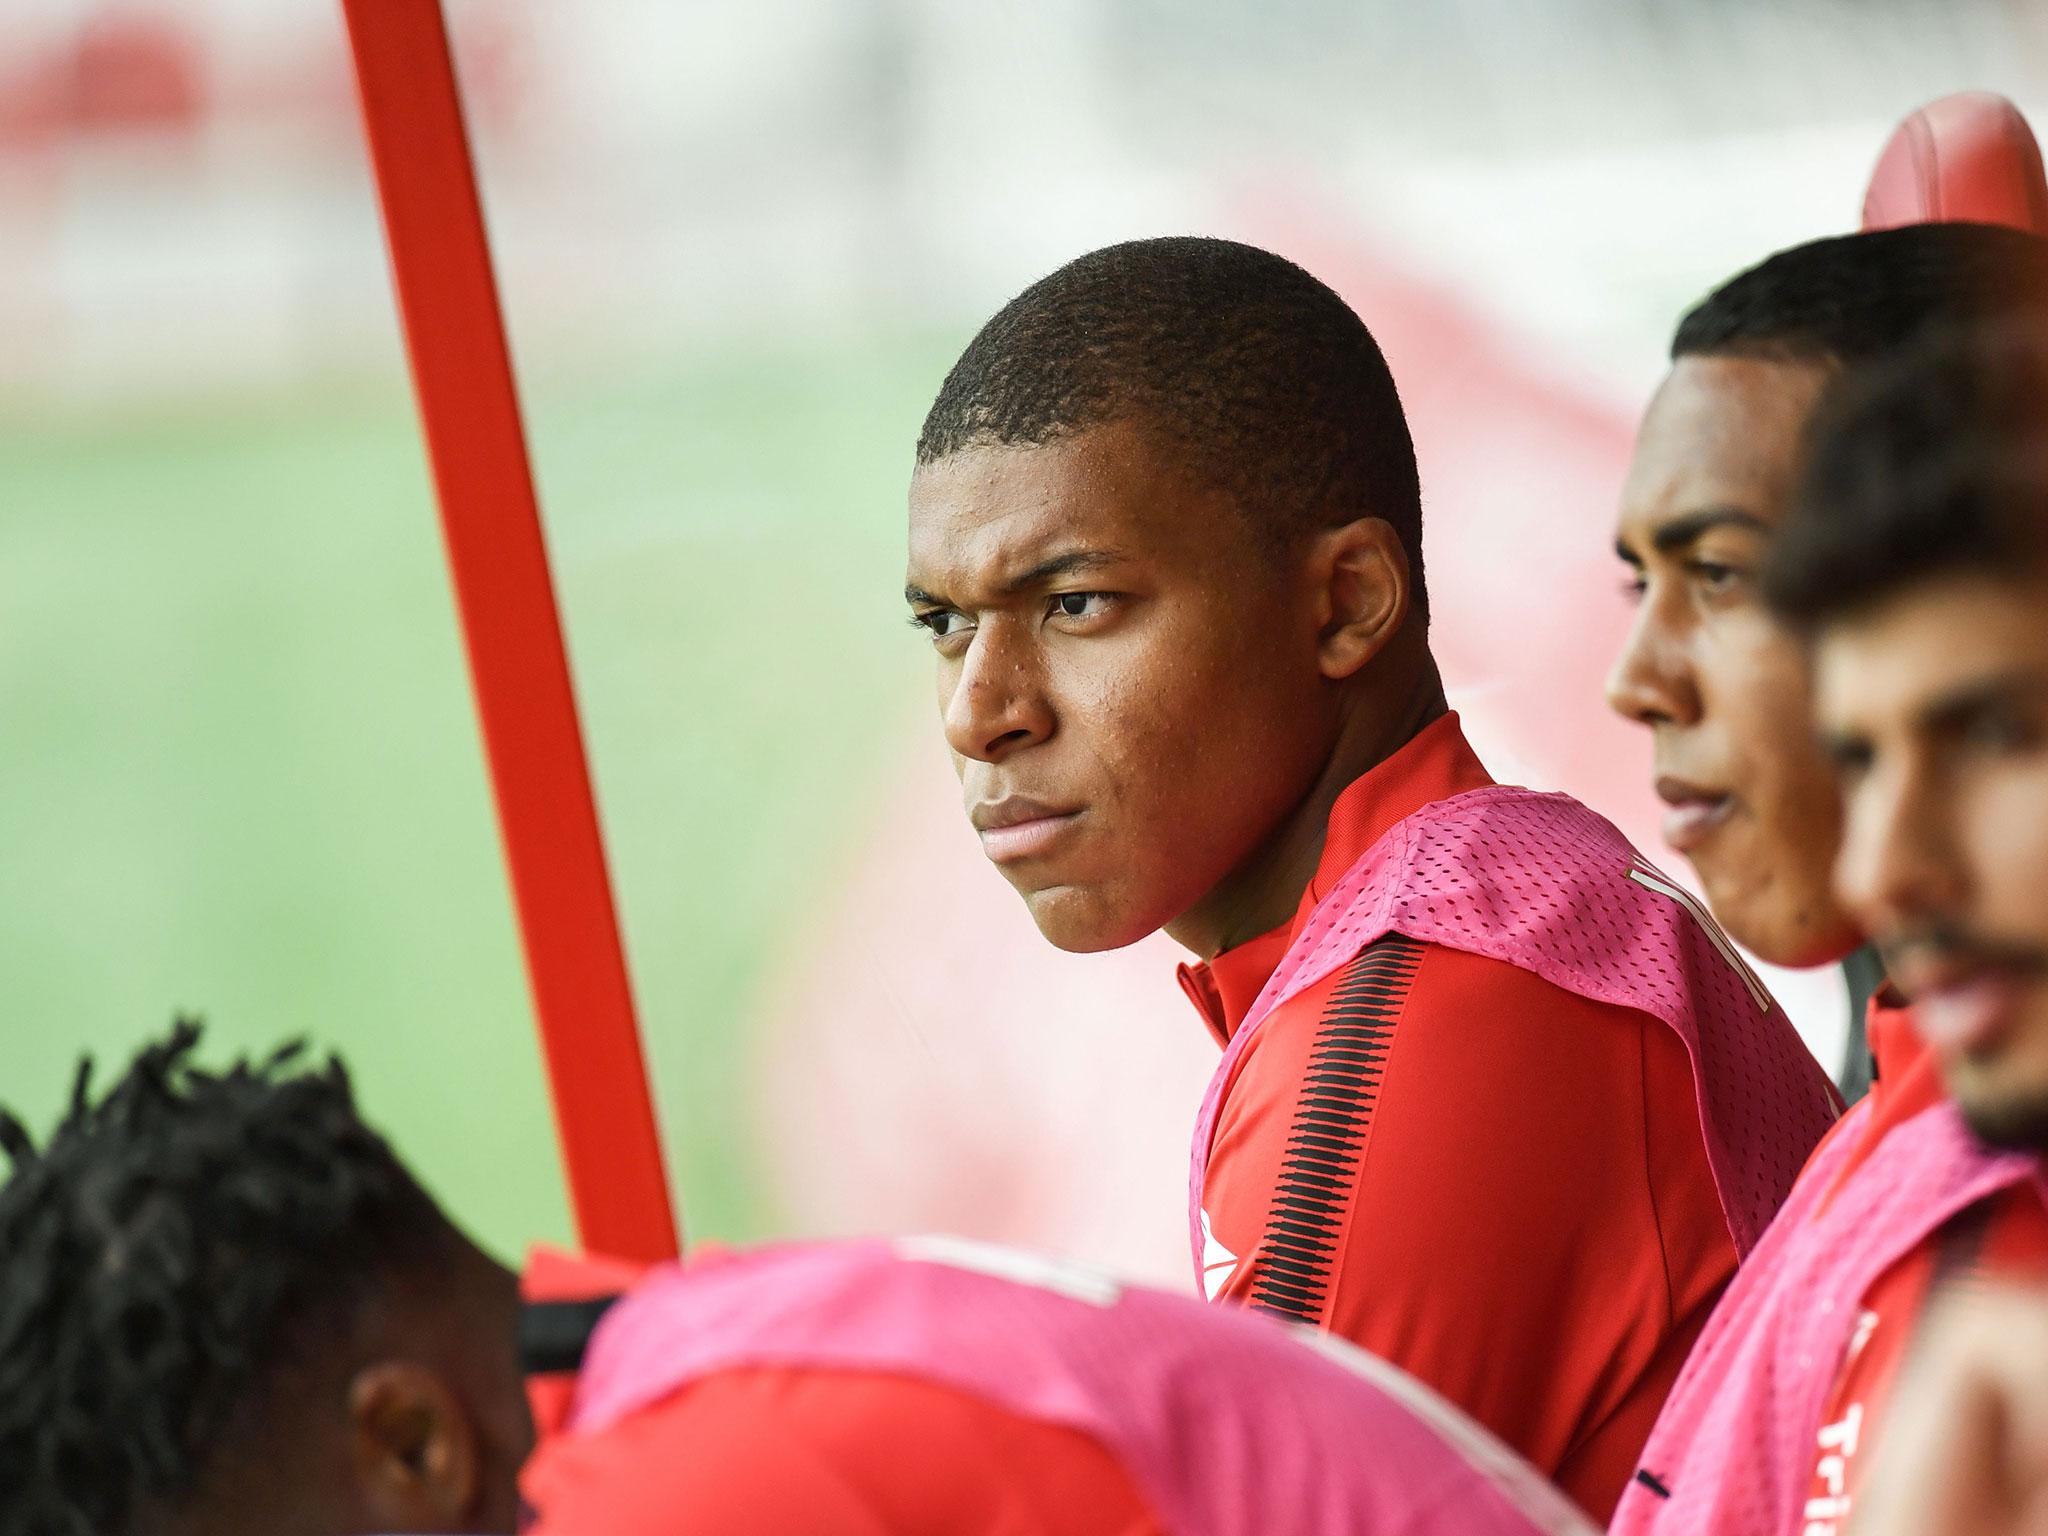 Kylian Mbappe finds himself in a similar position to the original Ronaldo and Michael Owen during their youth days